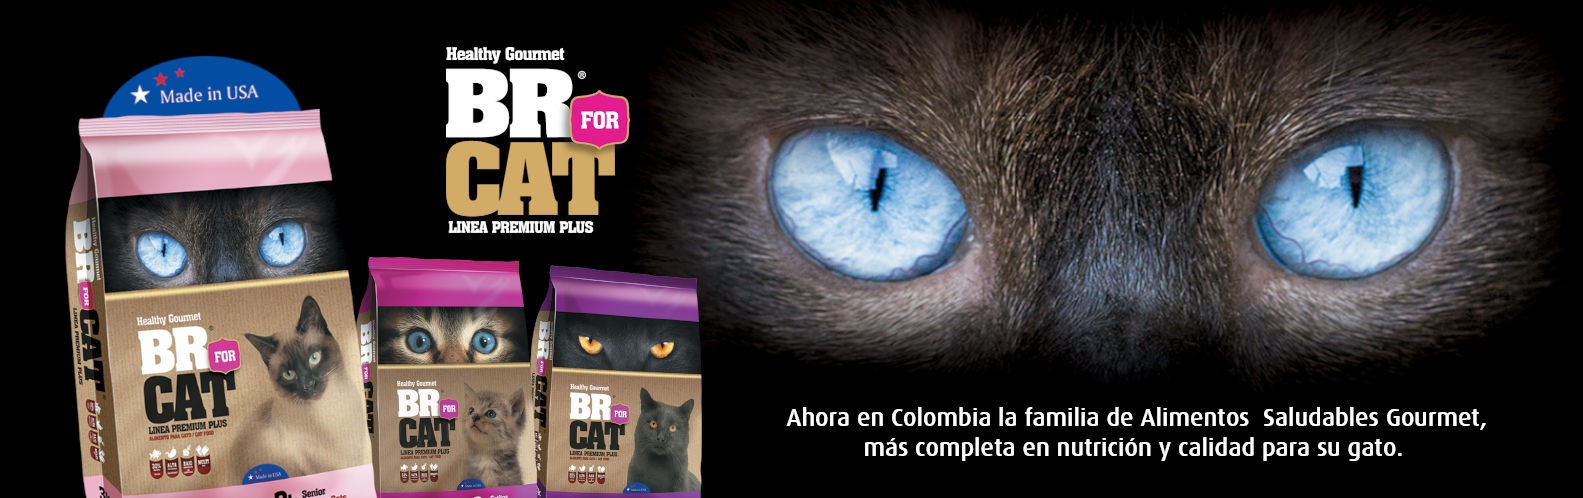 BR FOR CAT exiagricola